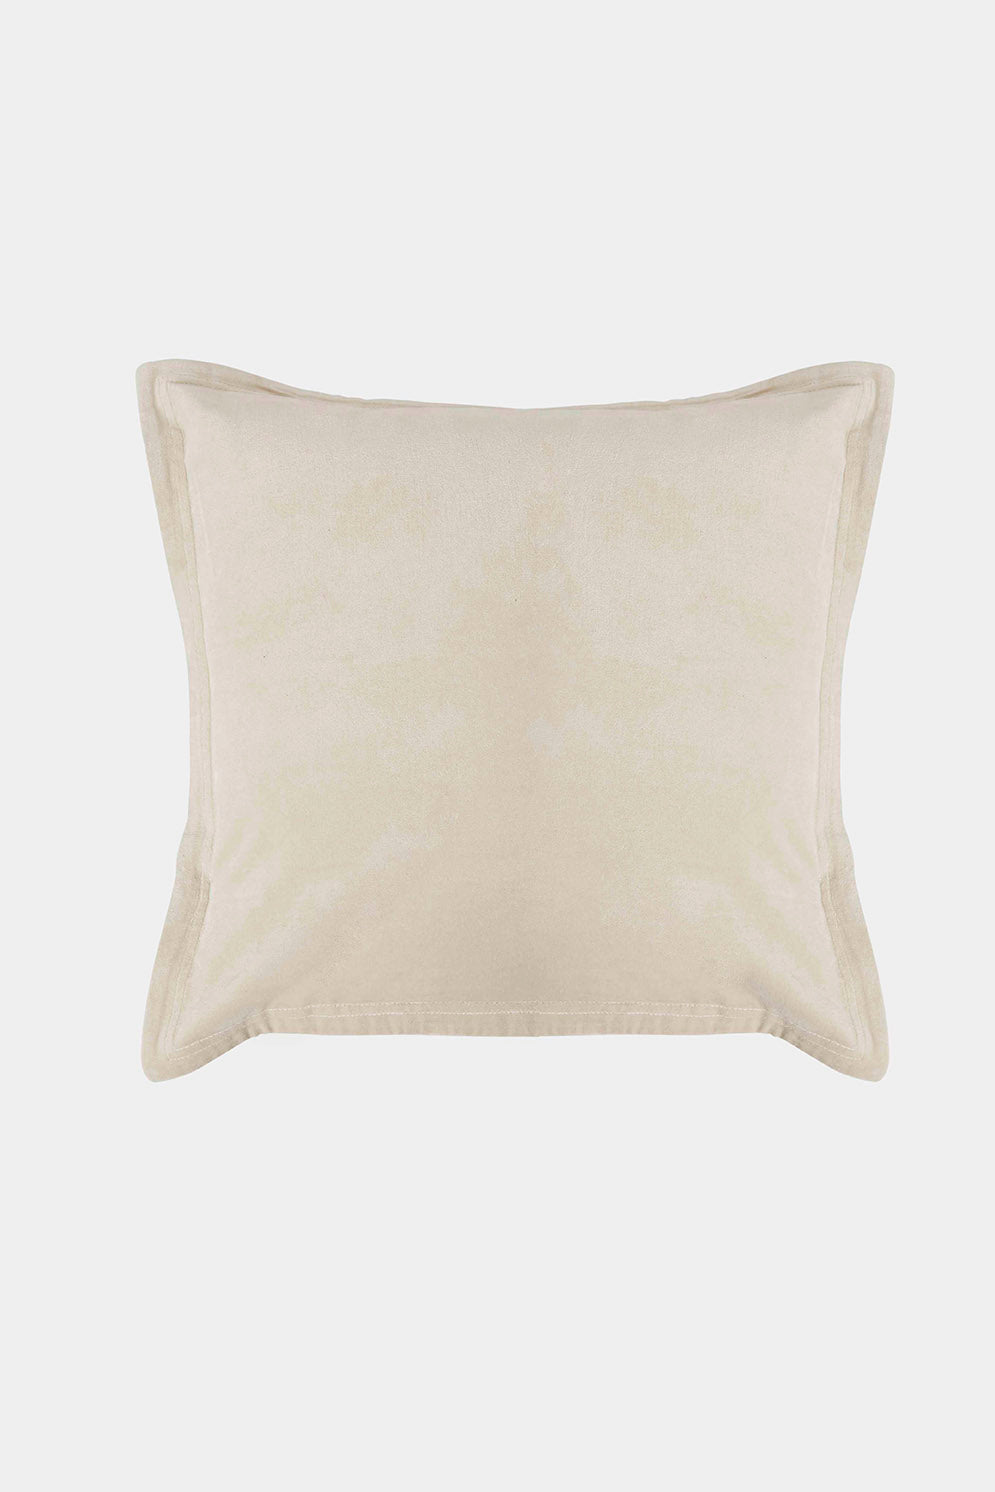 French Connection - Washed Velvet Cushion | French Connection |  Chair & Sofa Cushions | One size - Beige - Size: OS